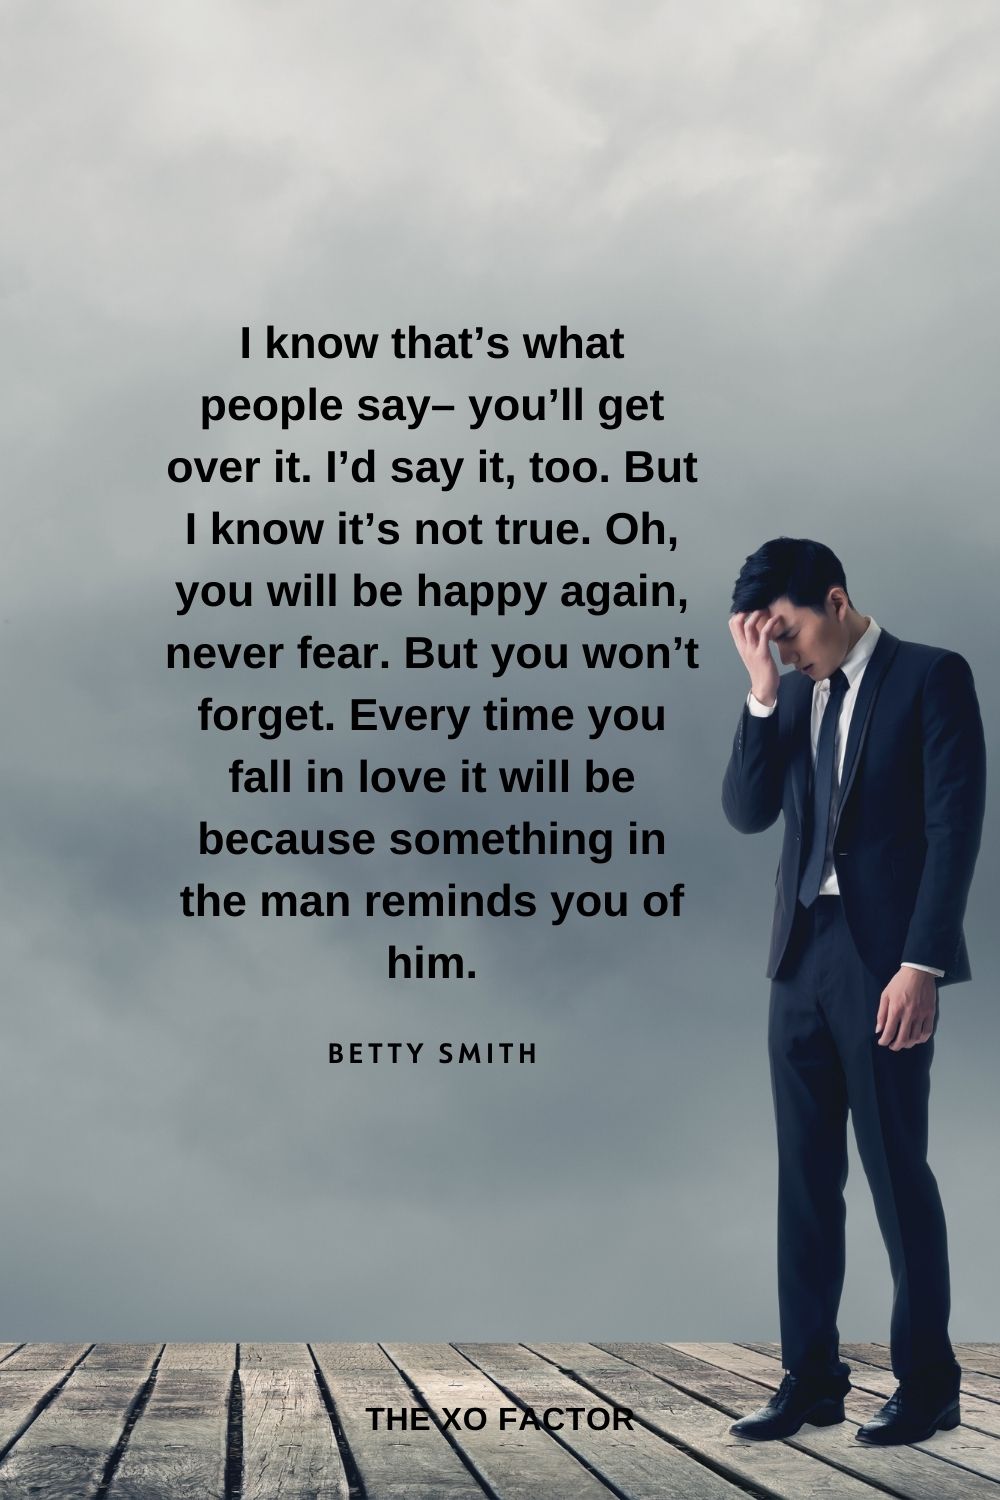 I know that’s what people say– you’ll get over it. I’d say it, too. But I know it’s not true. Oh, you will be happy again, never fear. But you won’t forget. Every time you fall in love it will be because something in the man reminds you of him. Betty Smith